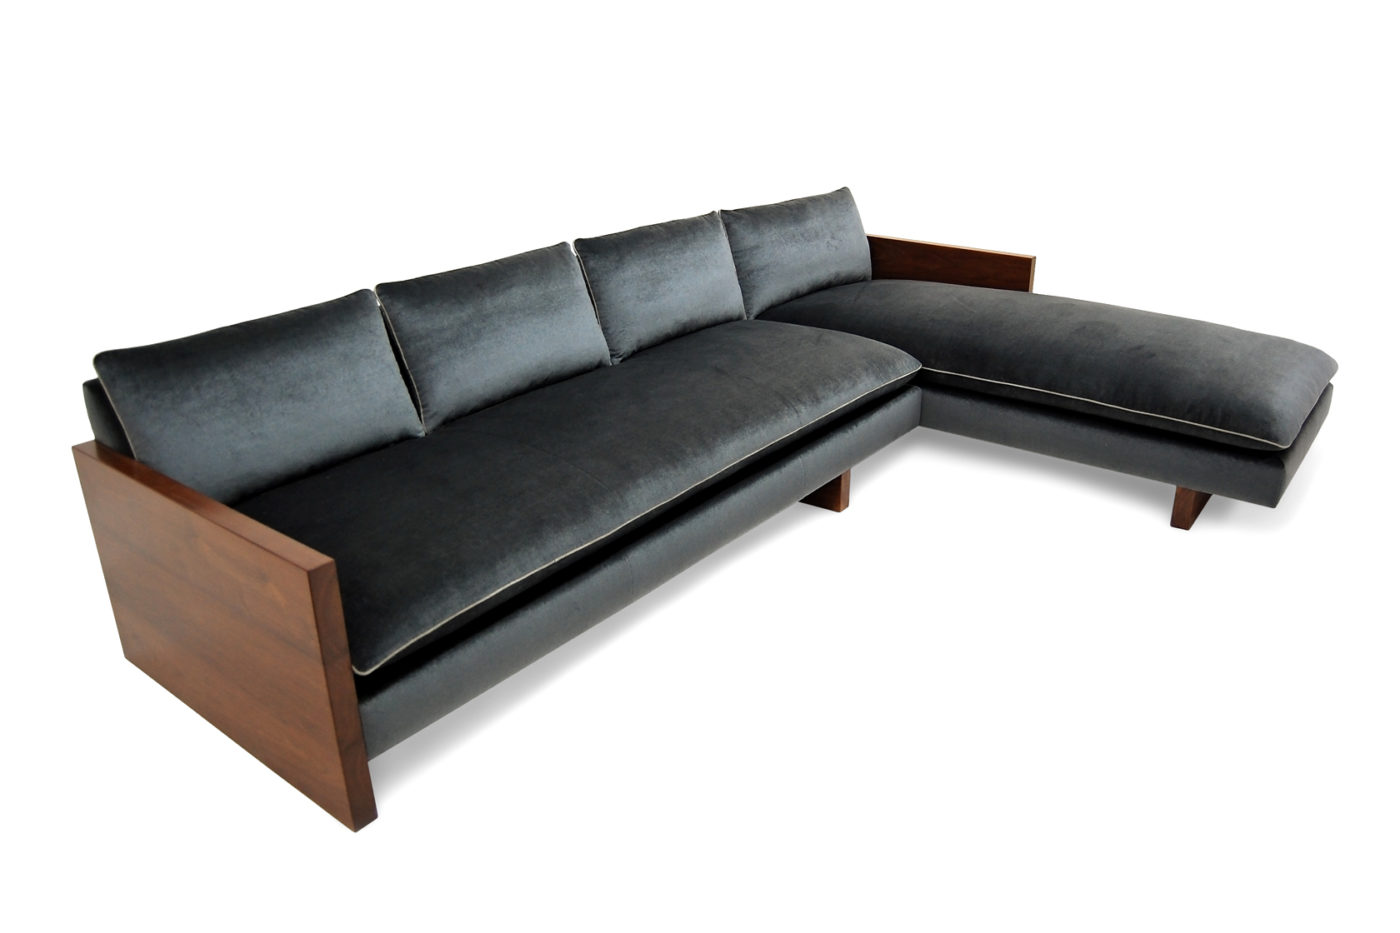 ROOM Aria Sectional Sofa Walnut Arms and Base Kiln-Dried Hardwood Frame, Knife-Edged Dark Grey Fabric Seat and Back Cushions White Piped Seam Made to Order Customizable Room Furniture